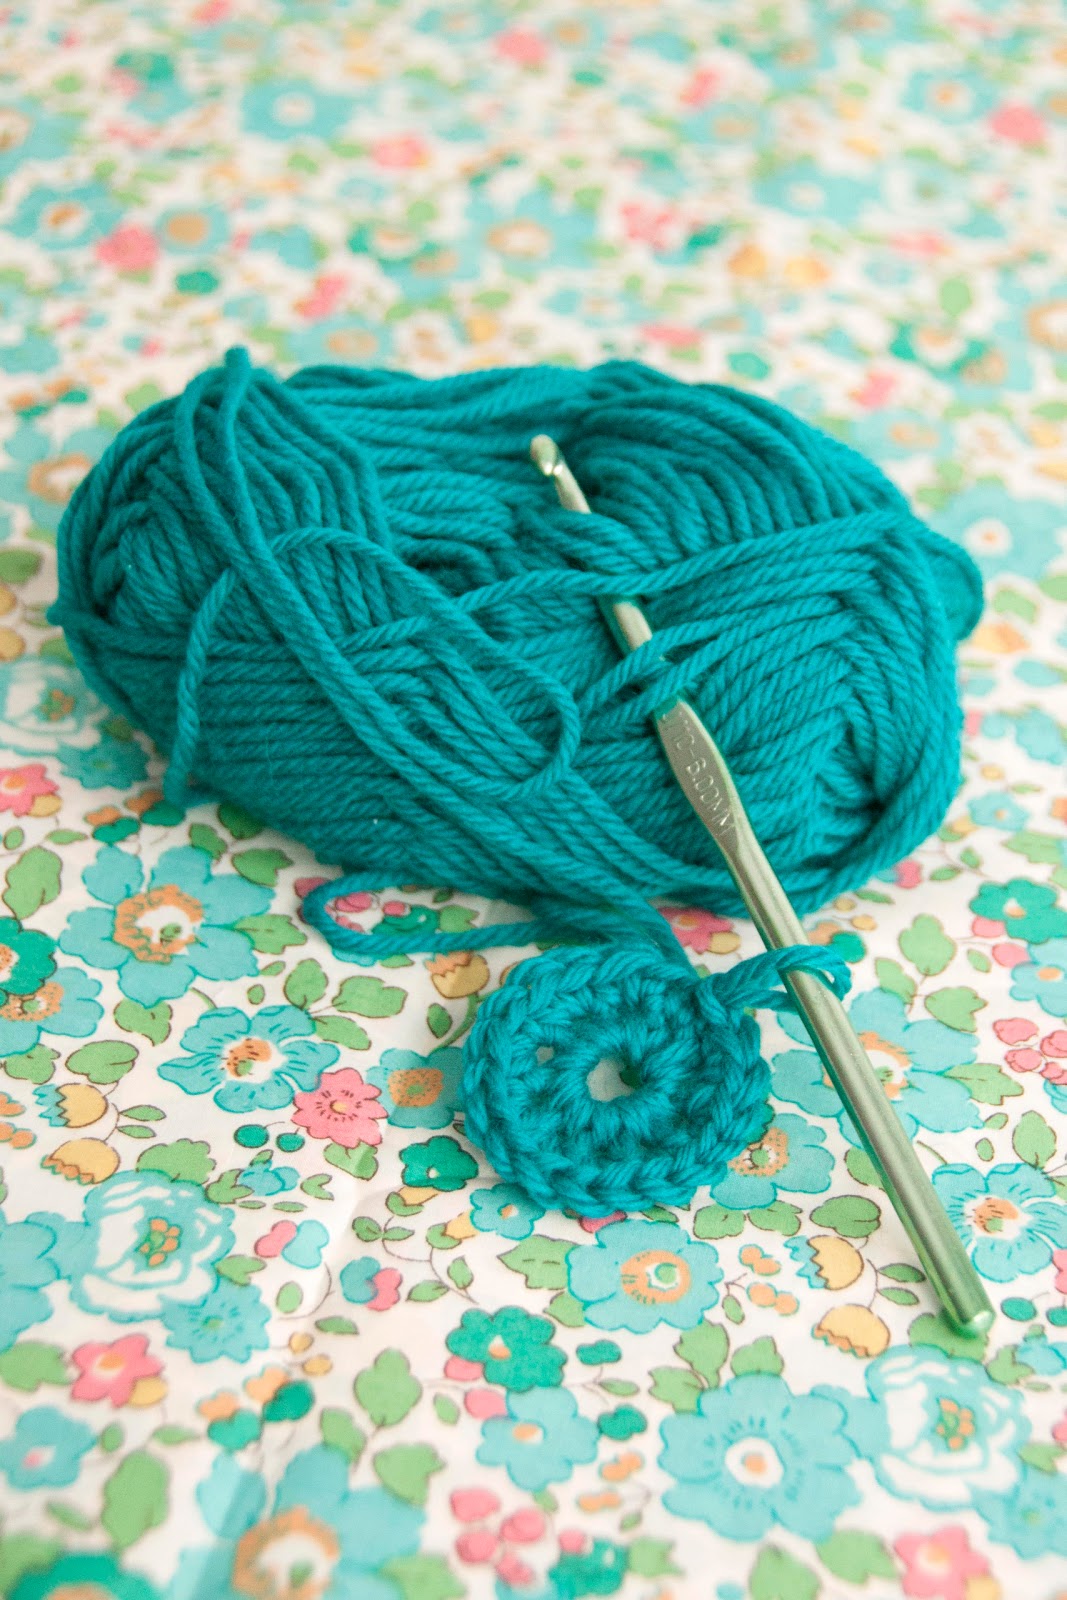 Aesthetic Nest: How to Crochet 10: Working in the Round